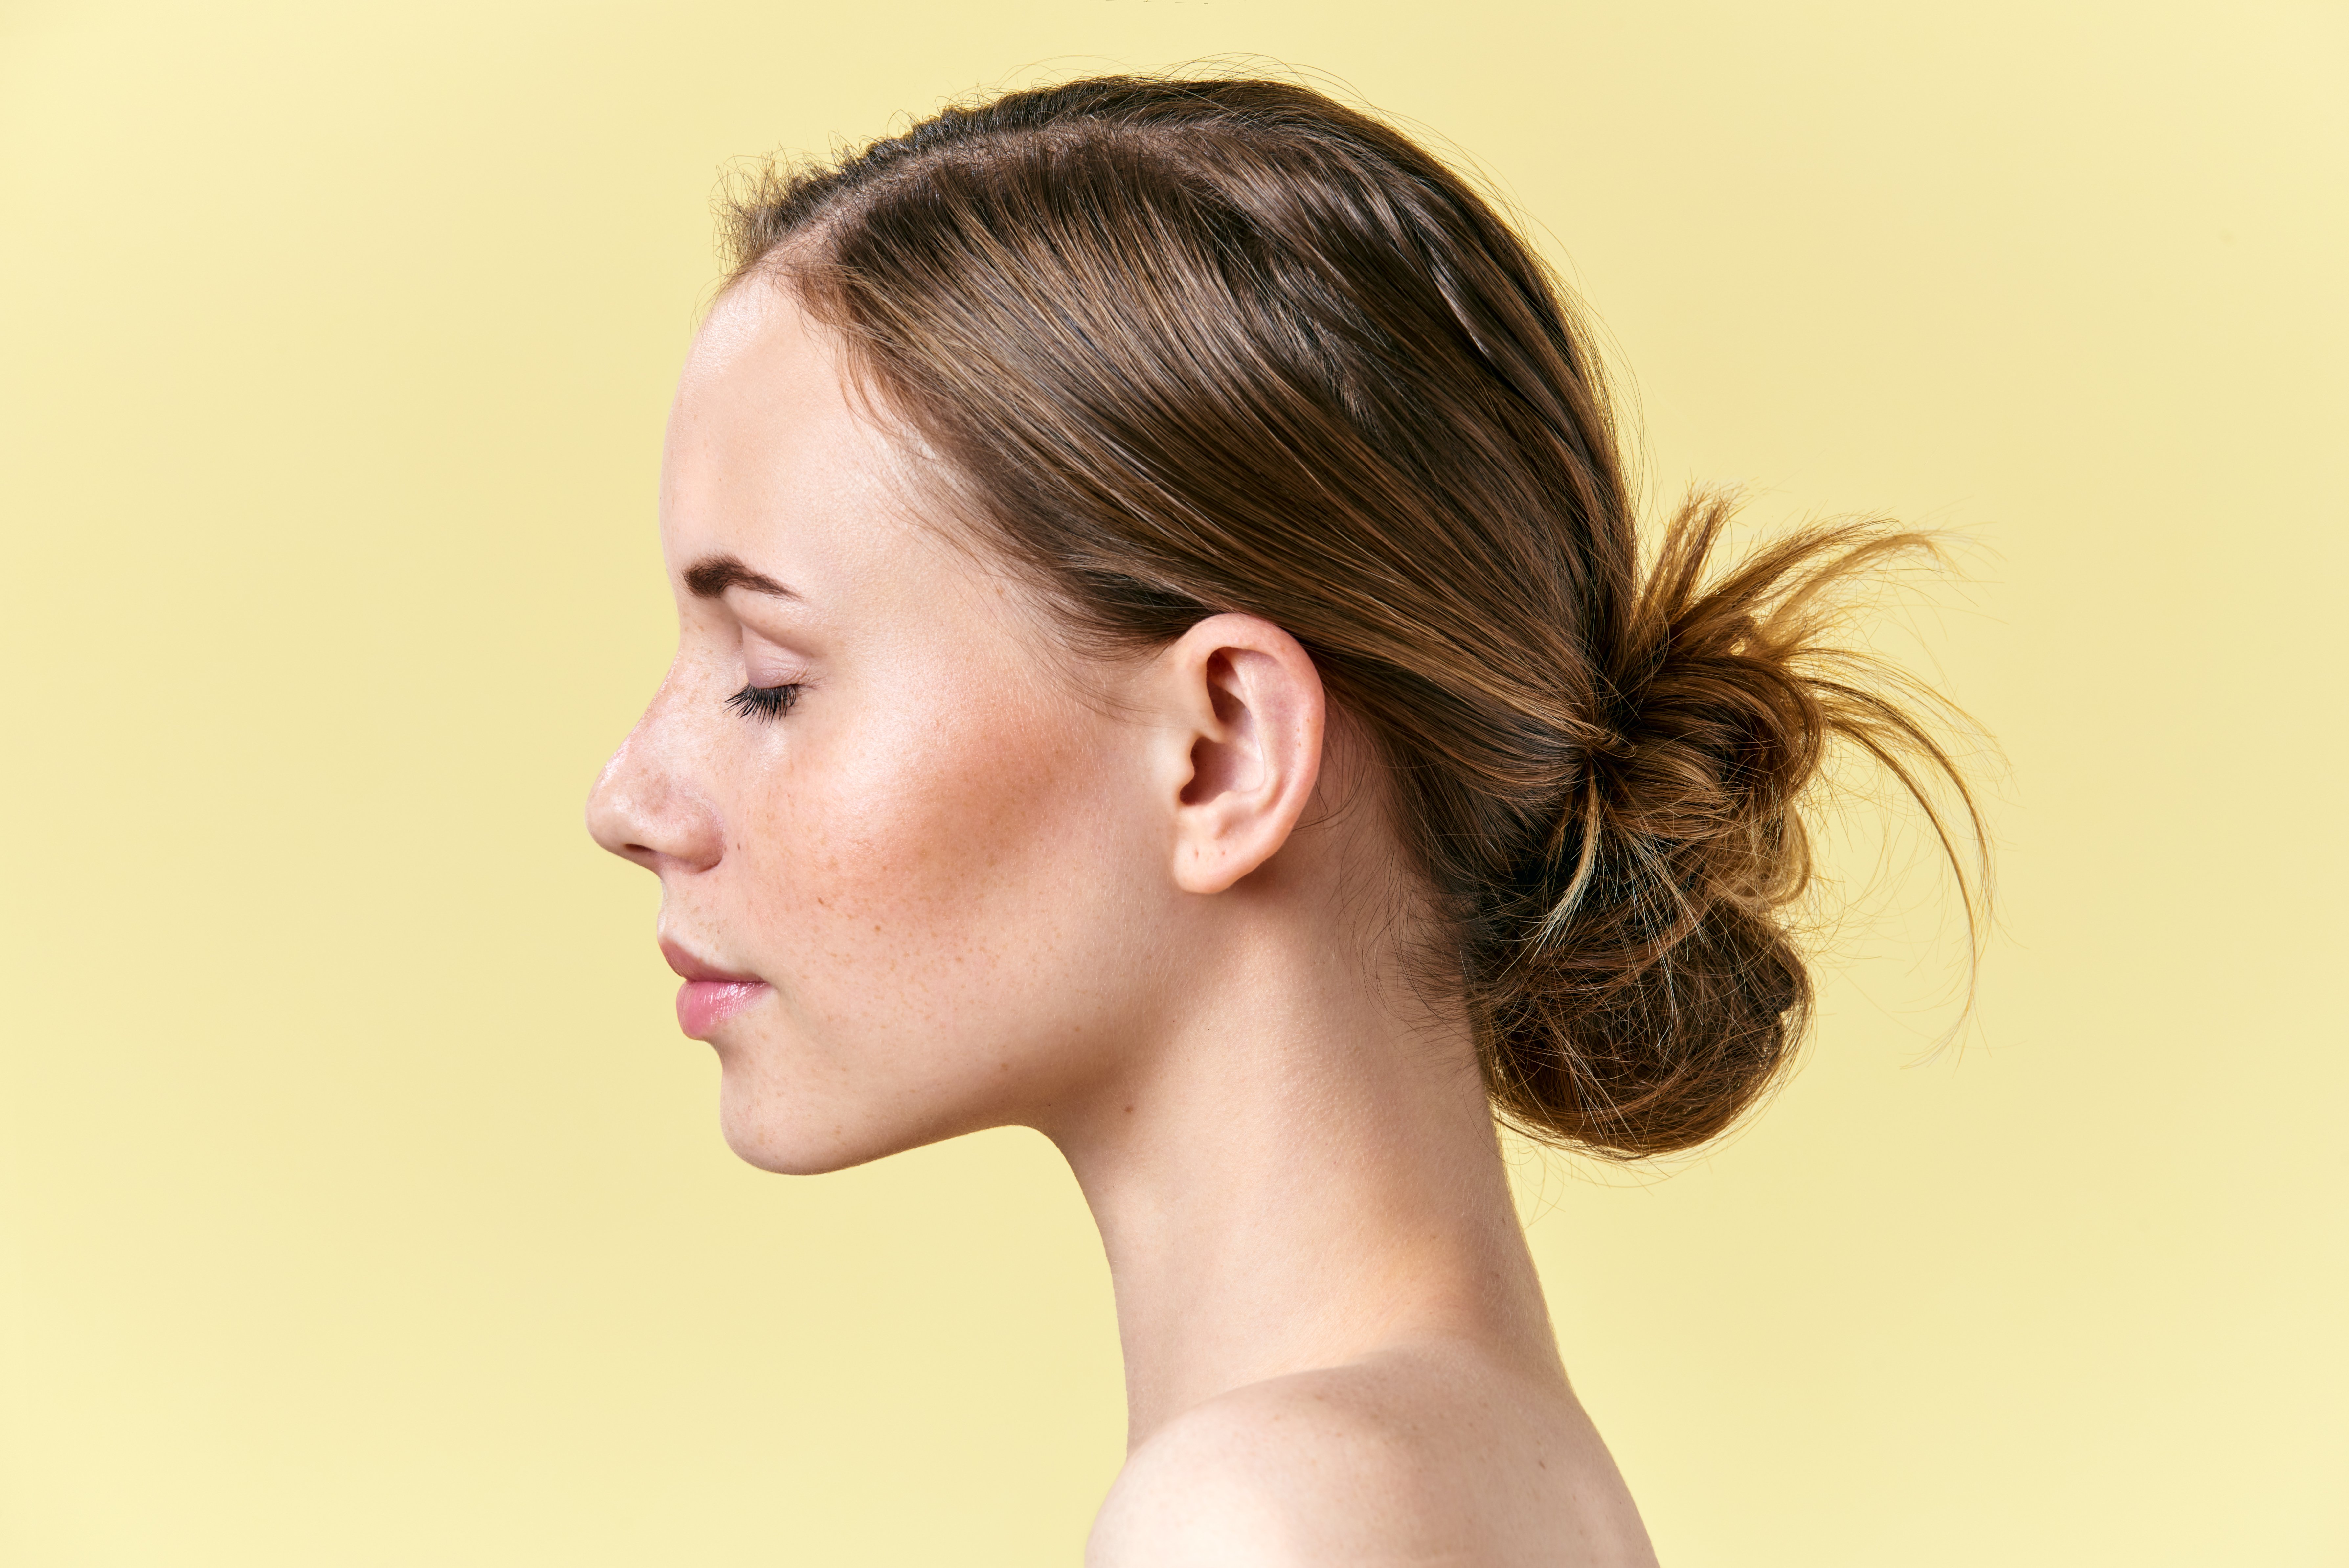 Skin and profile of face AndreaObzerova iStock  Getty Images Plus